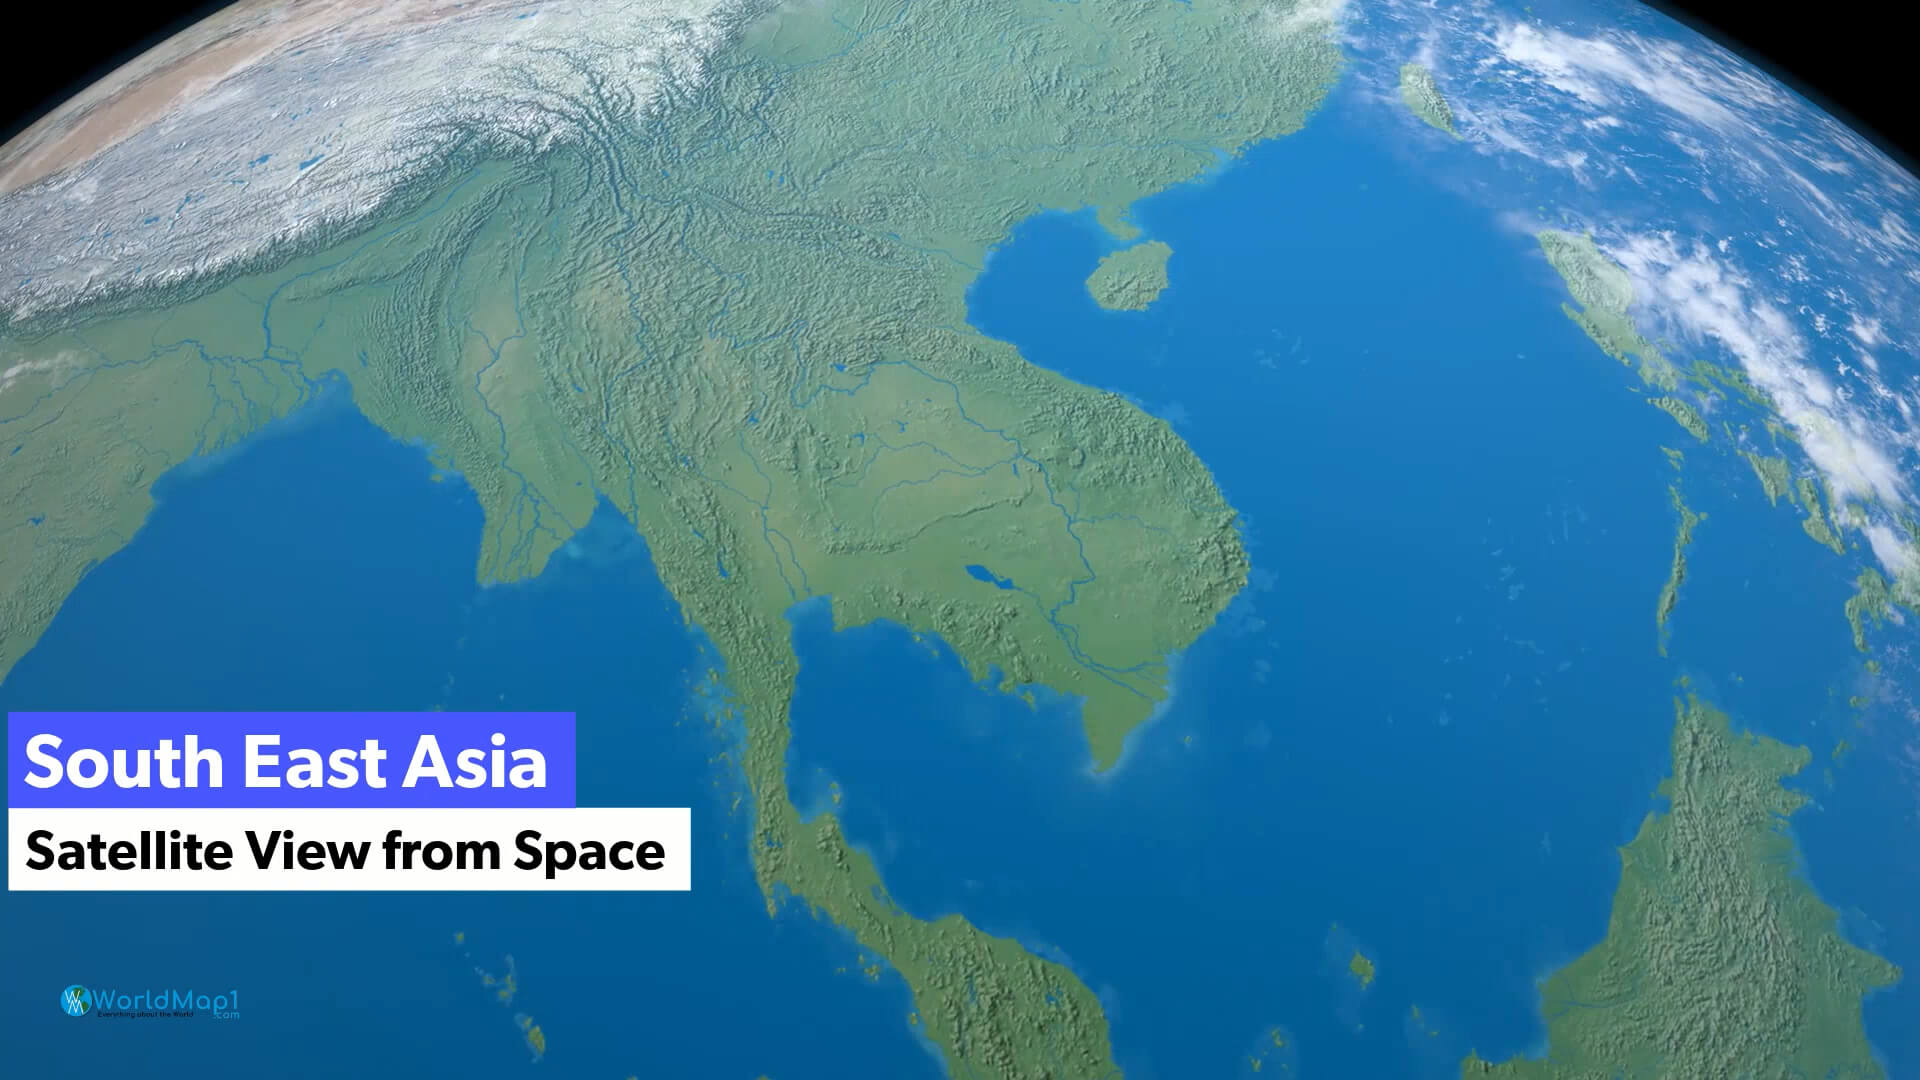 South East Asia Satellite View from Space